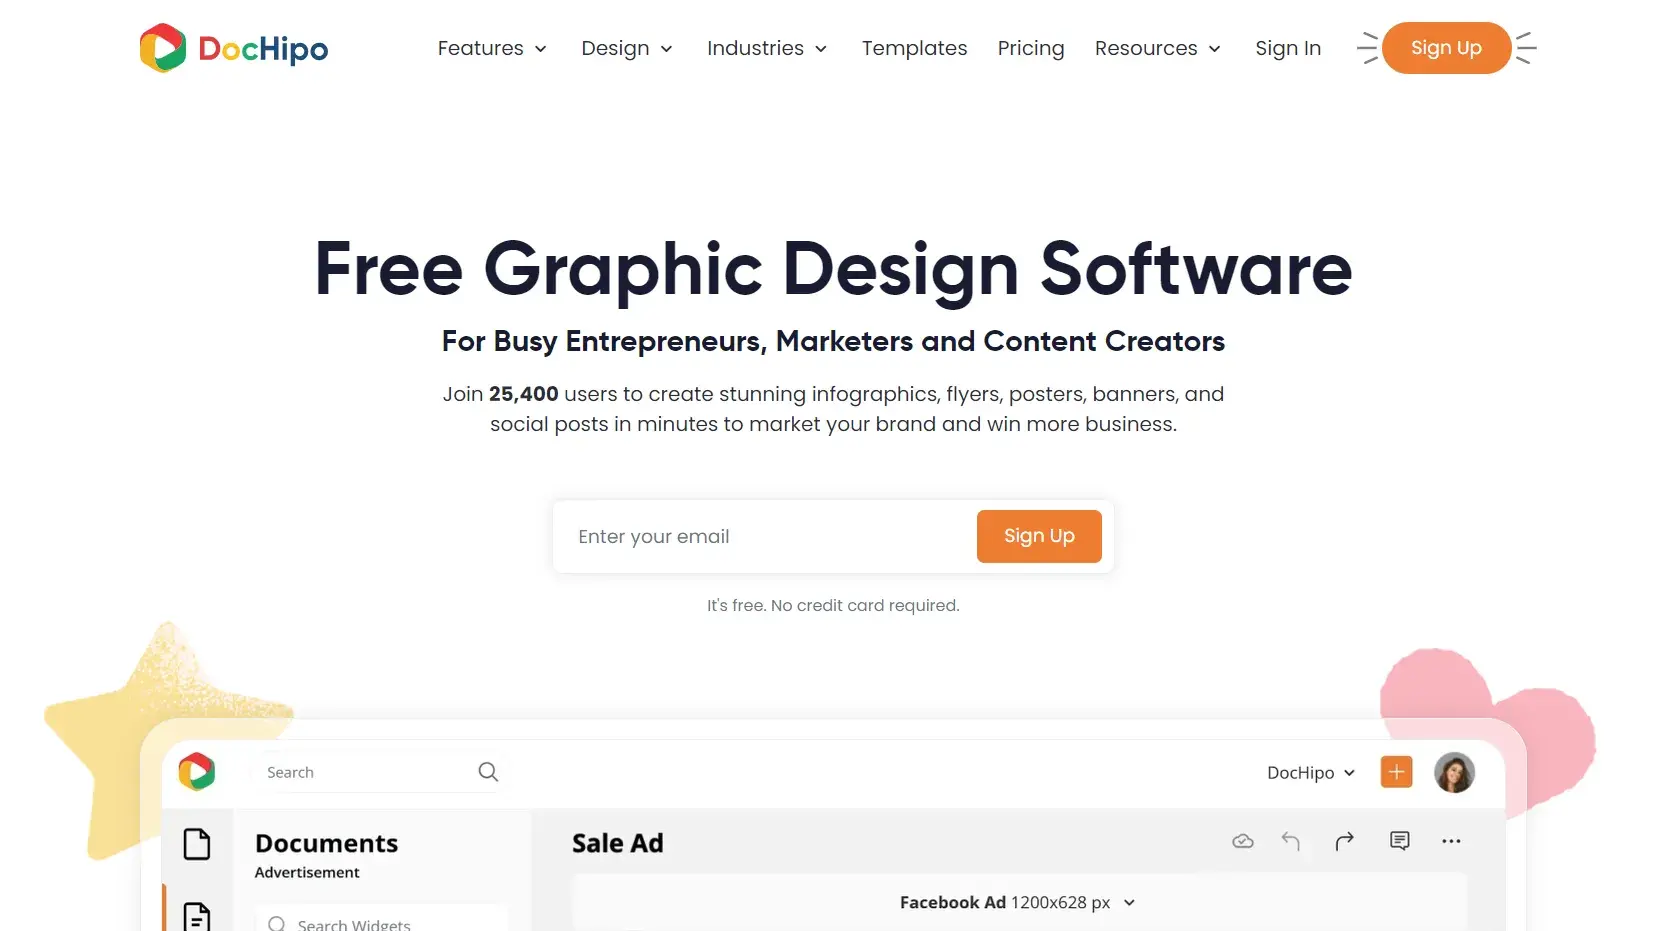 Best Free Graphic Design Software 39 20240614 35612 - The 13 Best Free Graphic Design Software for Marketers and Beginners